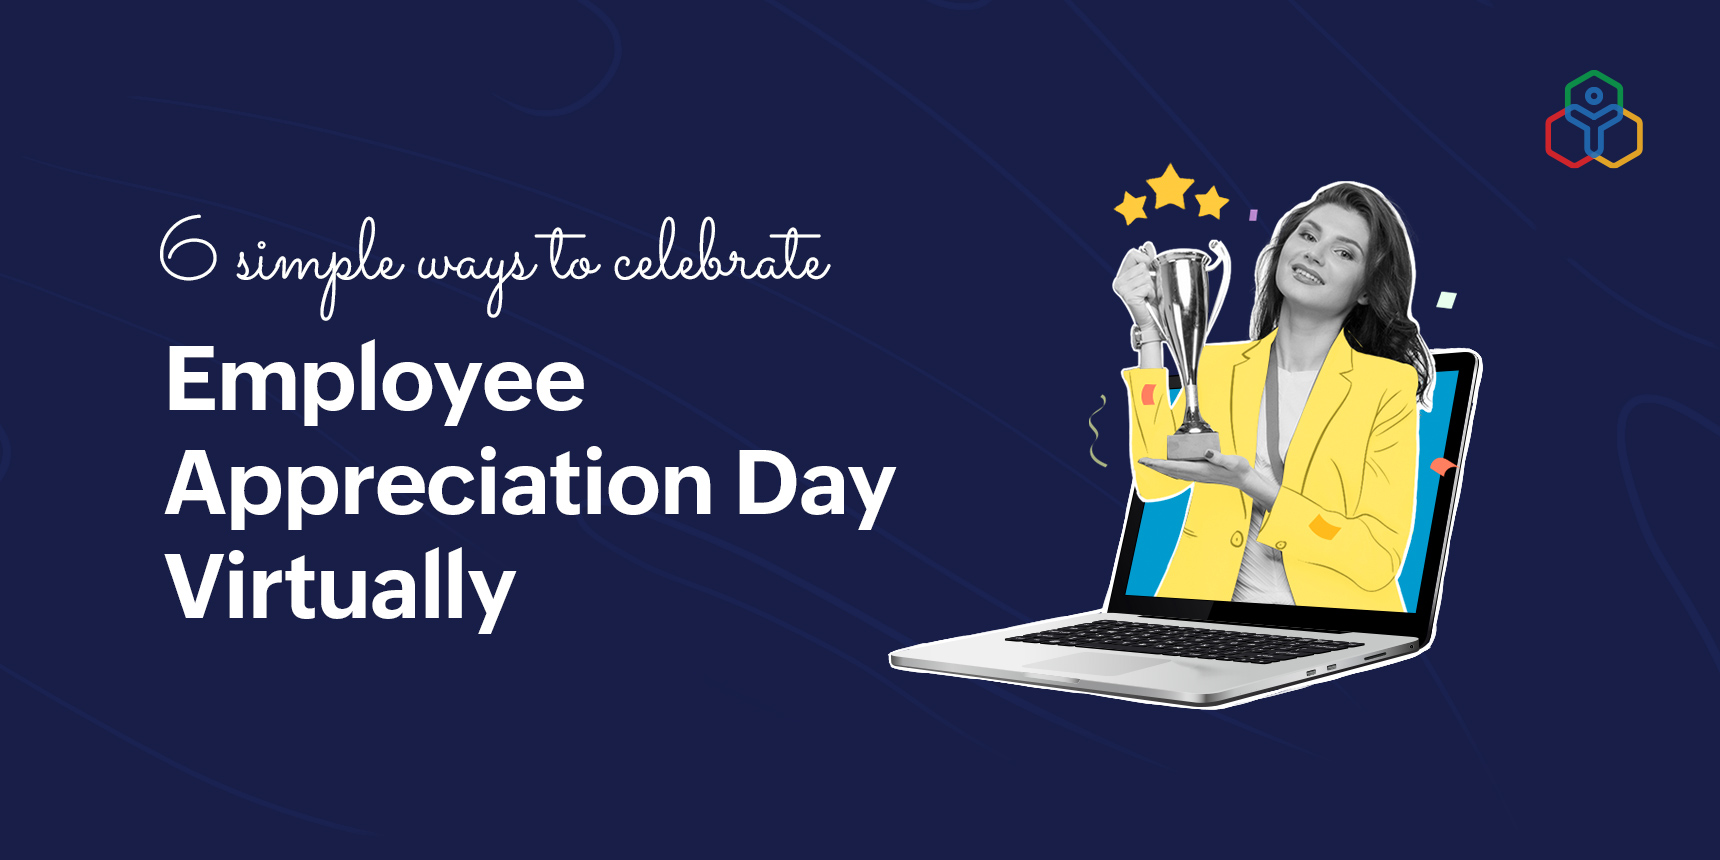 How organizations can celebrate Employee Appreciation Day virtually